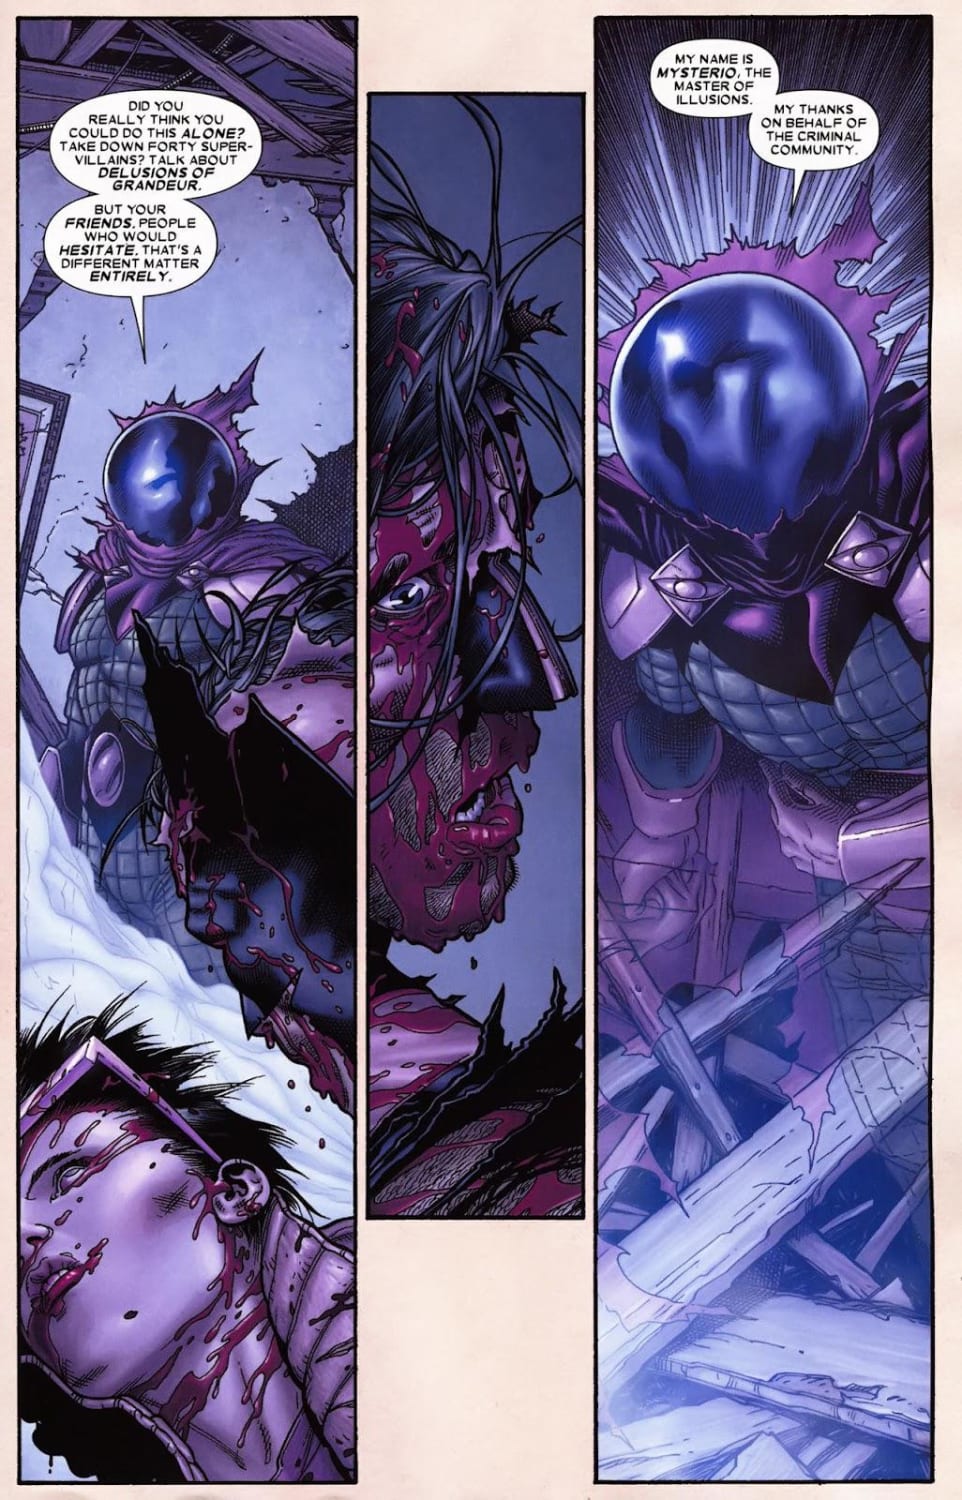 “My name is Mysterio, the Master of Illusions. My thanks on behalf of the criminal community.” (Wolverine #70)